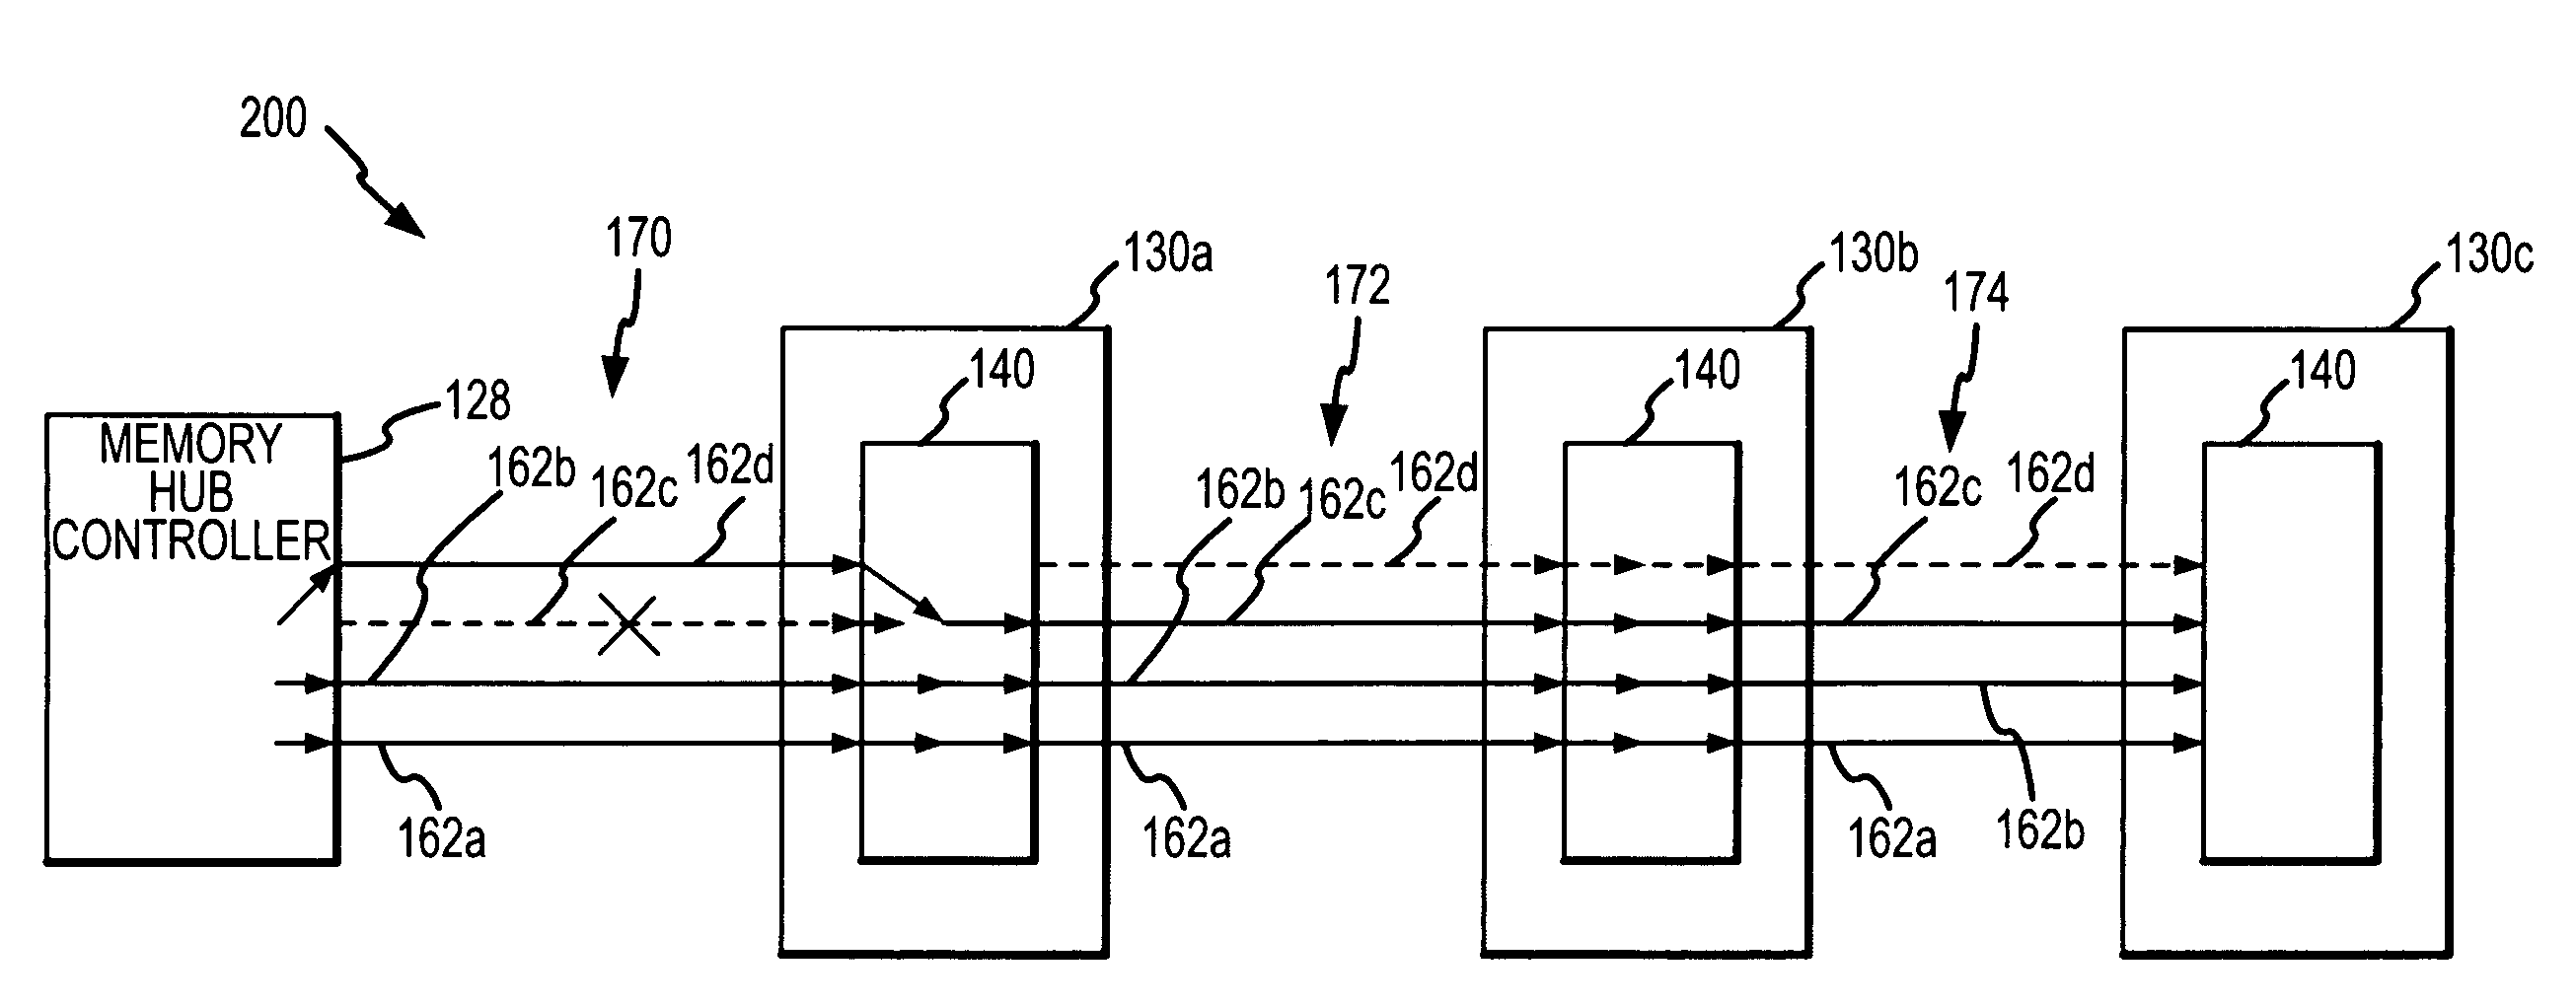 System and method for re-routing signals between memory system components